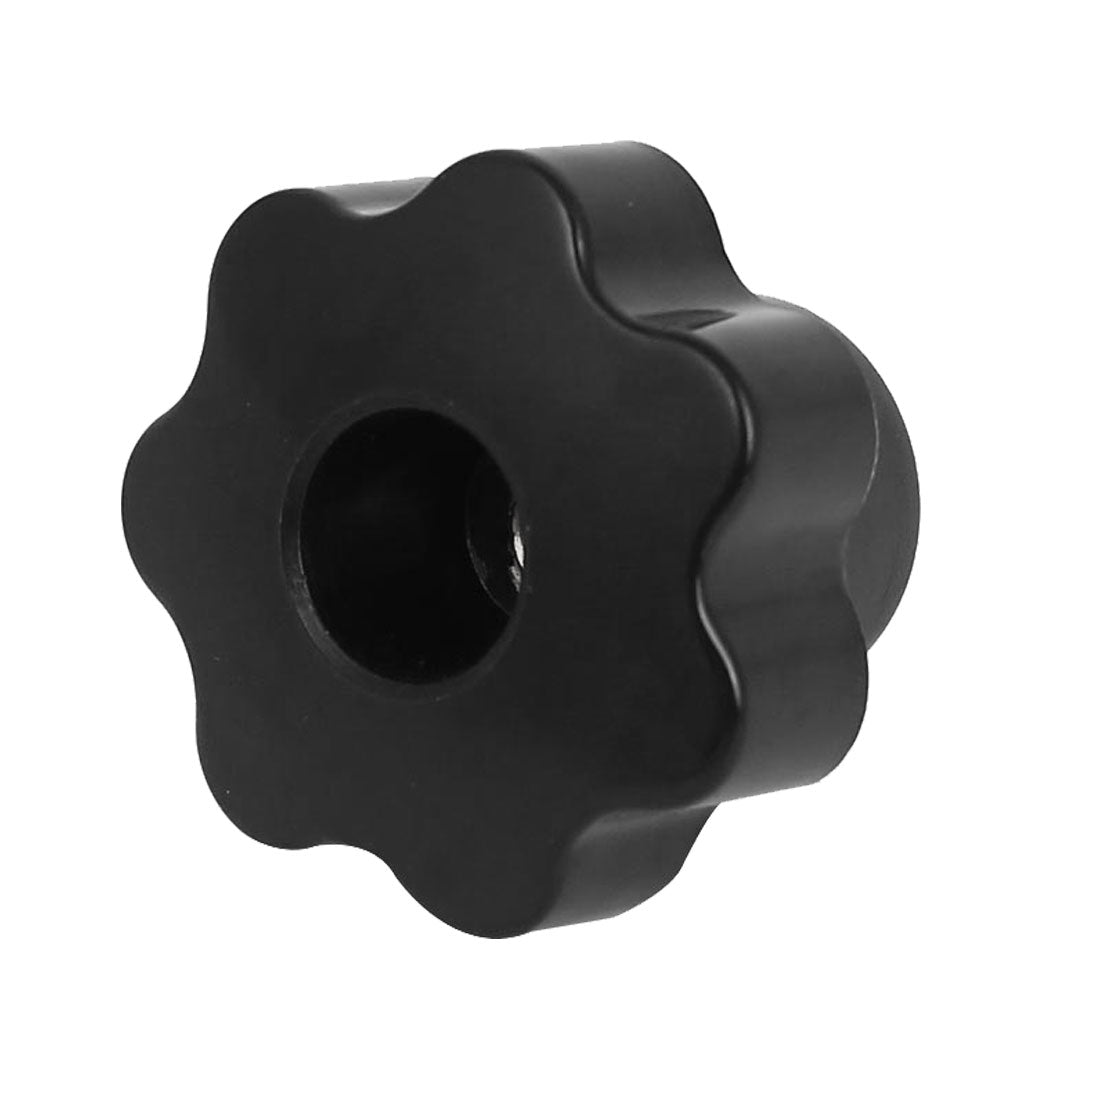 uxcell Uxcell M6 6mm Female Thread Plastic Head Screw On Clamping Nuts Knob Black